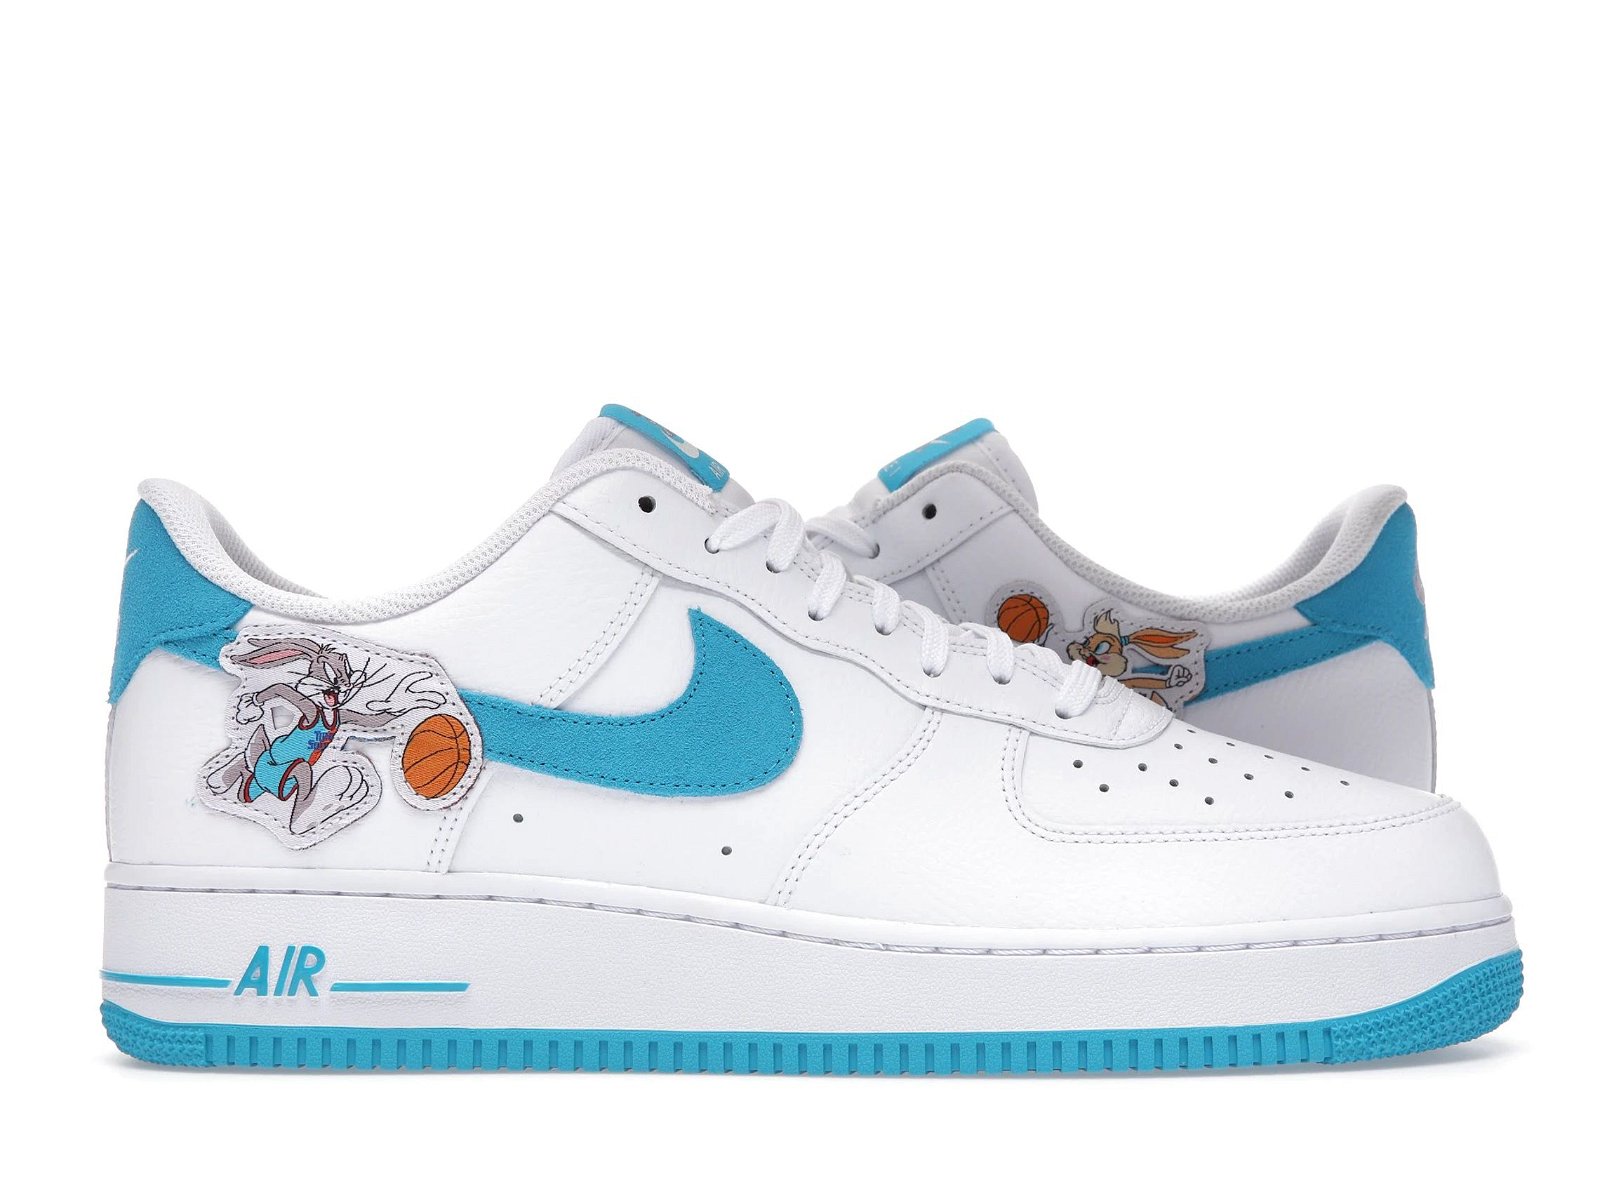 Nike Space Jam x Air Force 1 '07 Low "Hare"